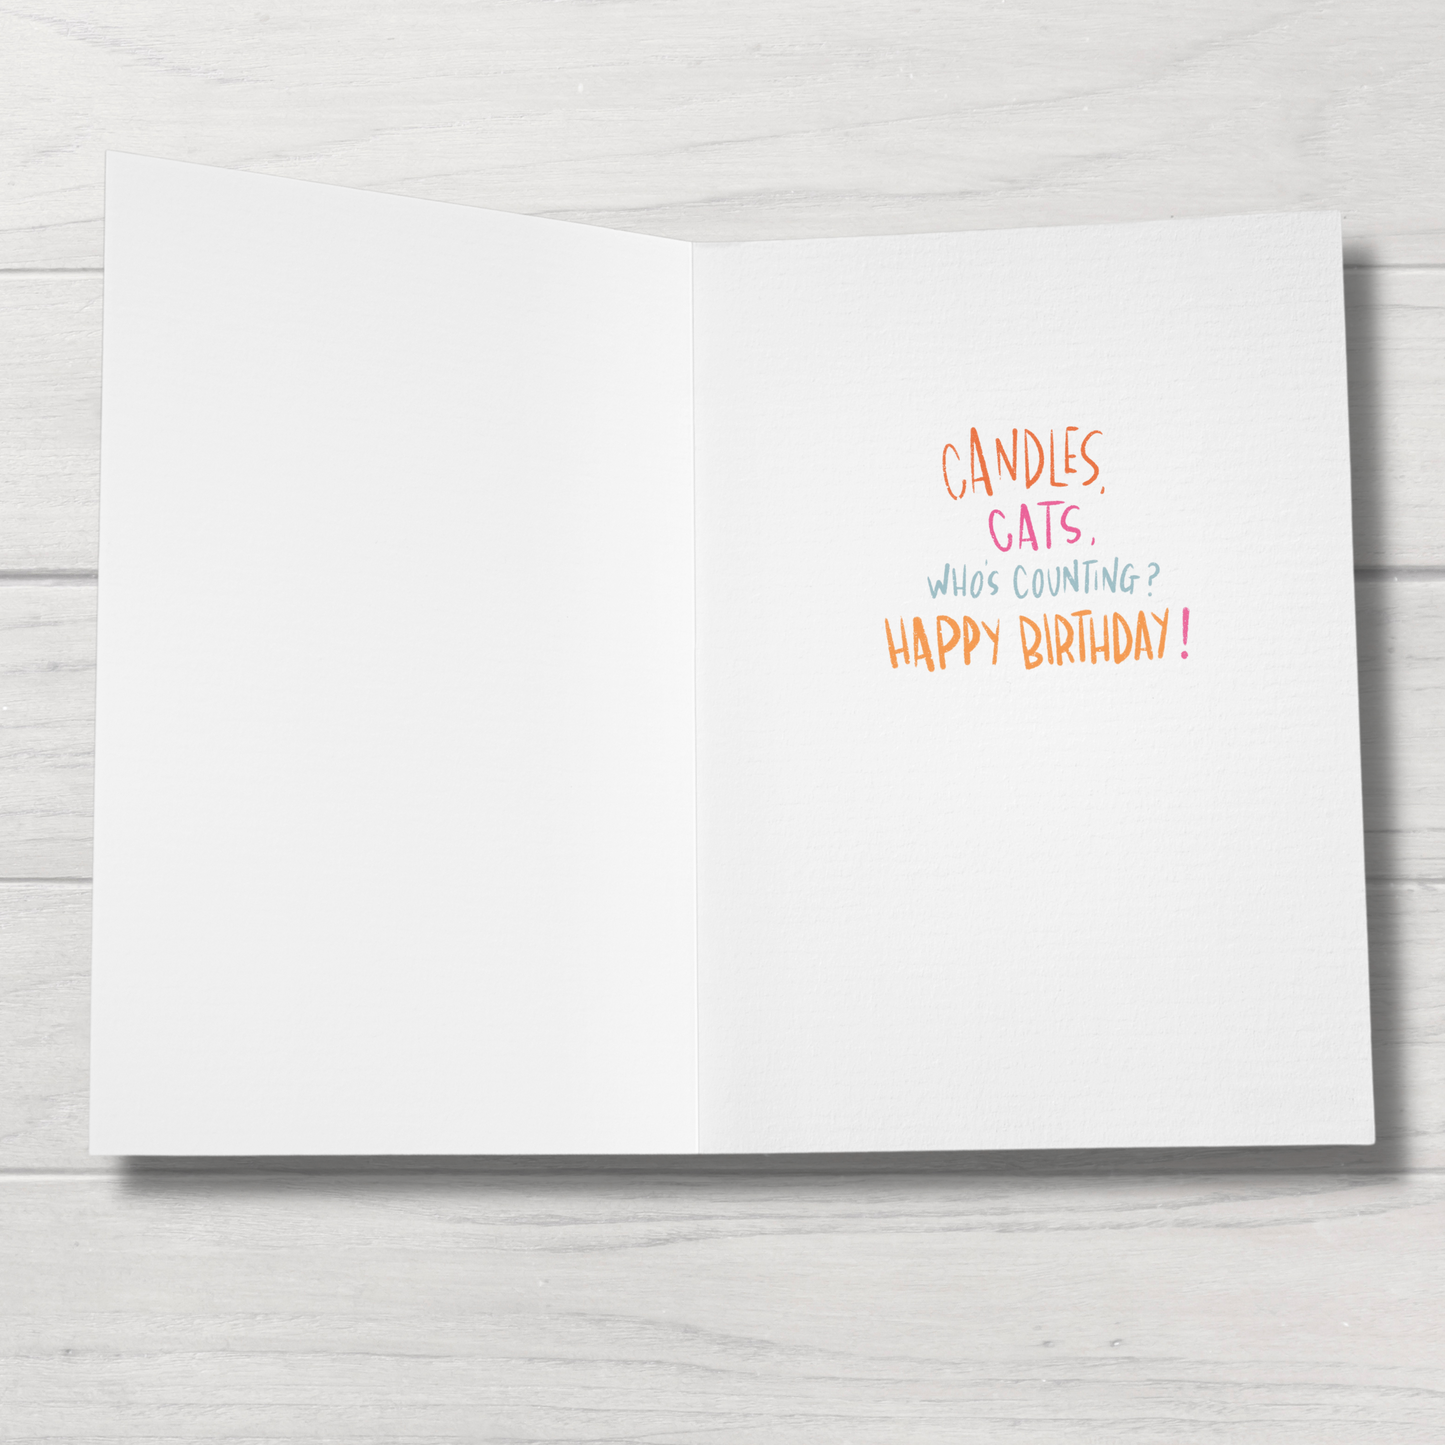 Cat Birthday Card | Funny Cat Card | Birthday Cats | Lost Count